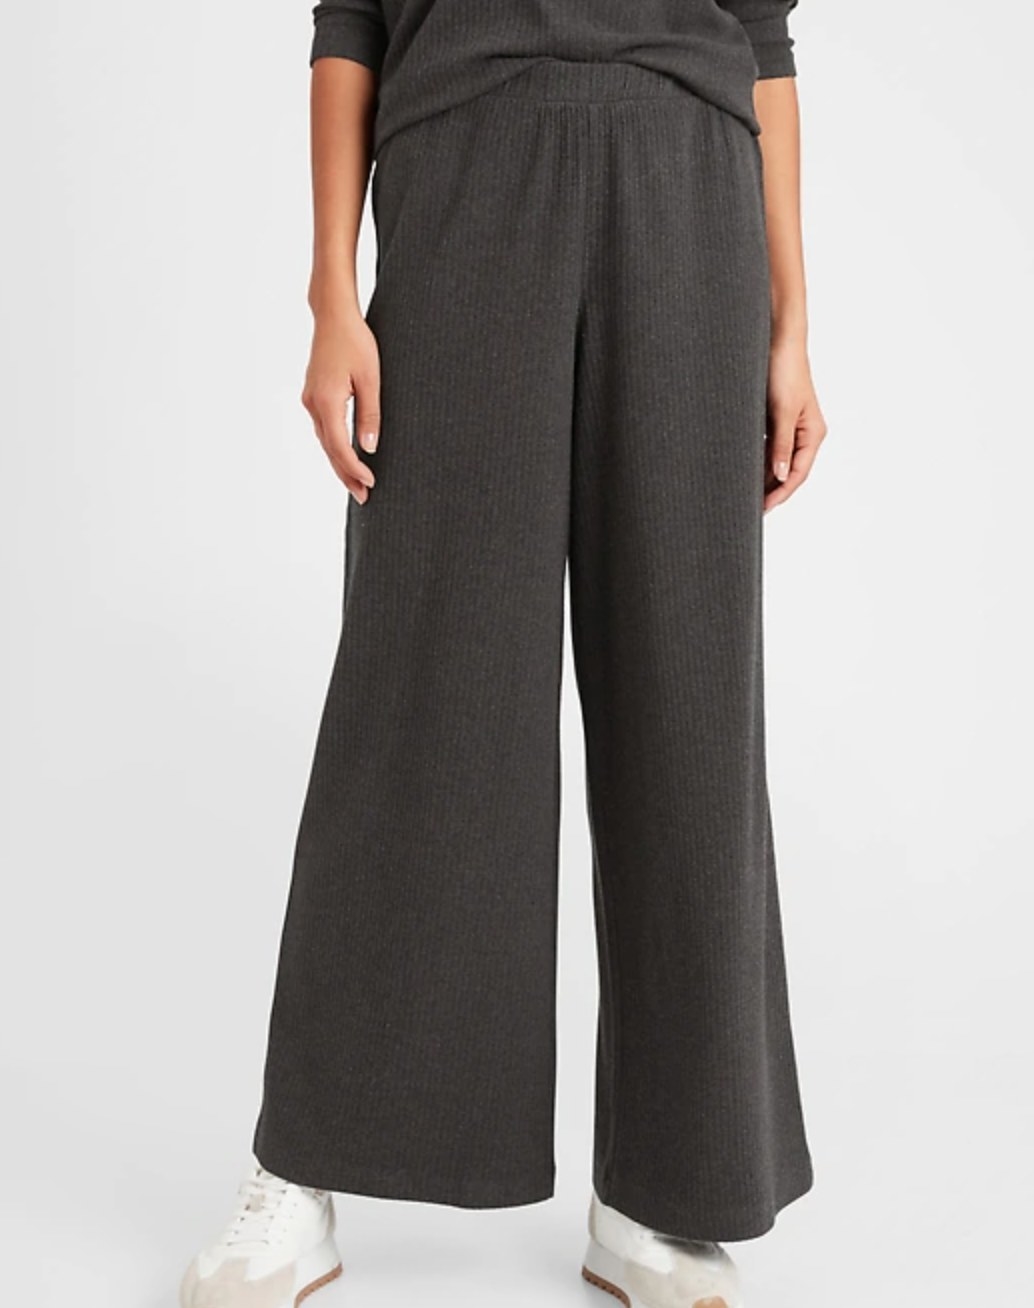 The pair of wide-leg ribbed knit pants in charcoal grey